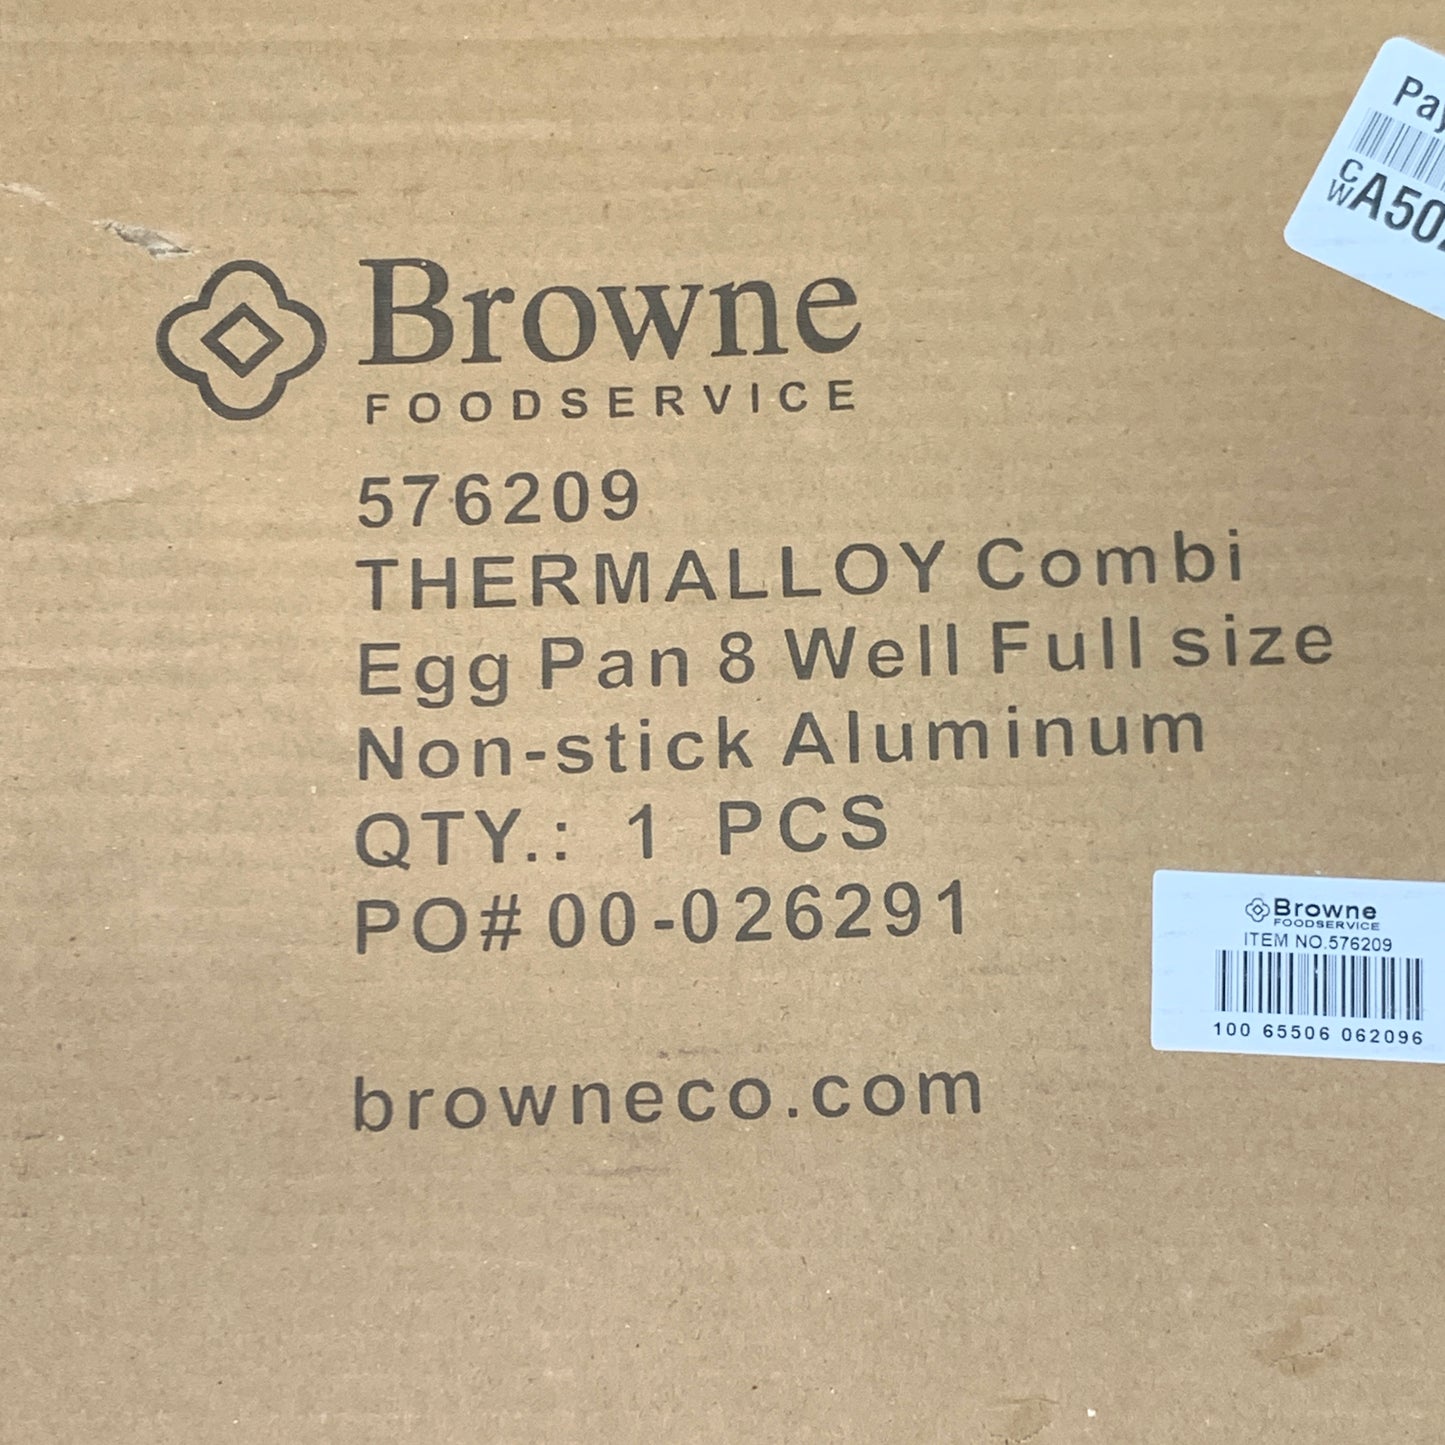 BROWNE 3-PACK! Foodservice Thermalloy Combi Pan 8 21.5L"x13W"x1H" 576209 (New)